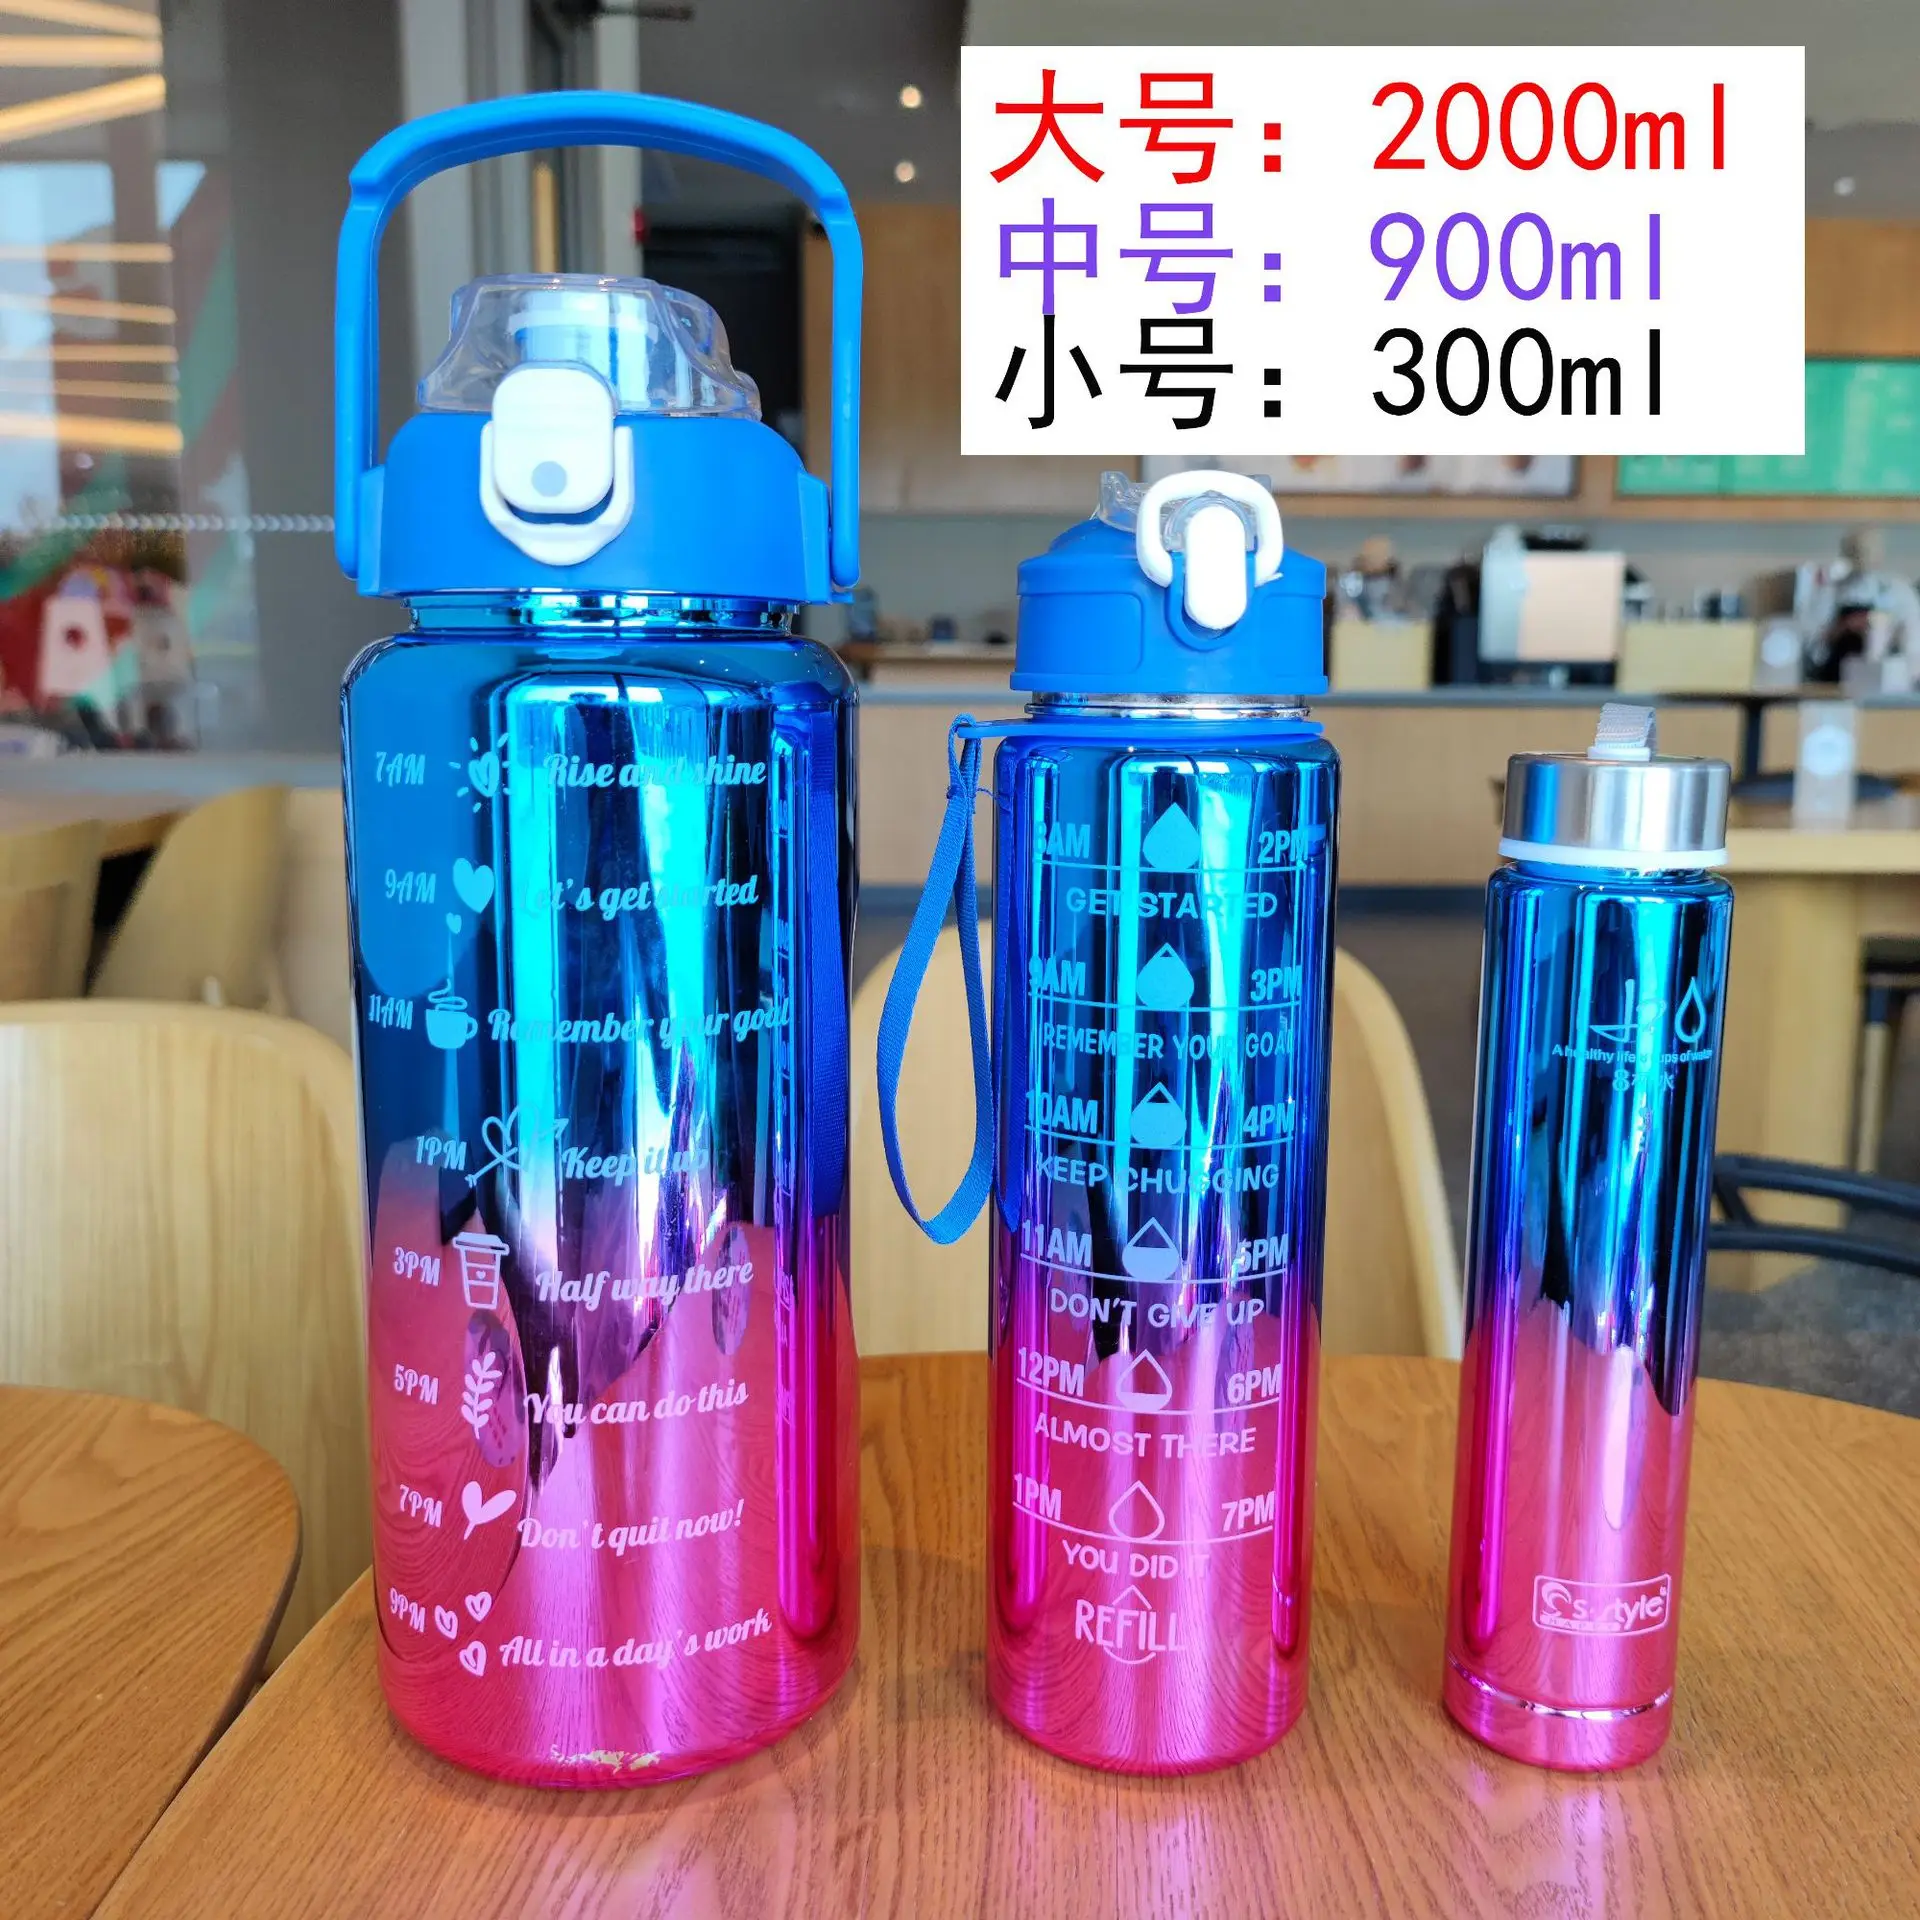 https://ae01.alicdn.com/kf/S545bea7297454b4a822fd8d2000e83f91/Graduated-Plastic-Cup-with-Handle-Electroplating-Large-Capacity-Sports-Water-Bottle-Colorful-Water-Cup-with-Handle.jpg